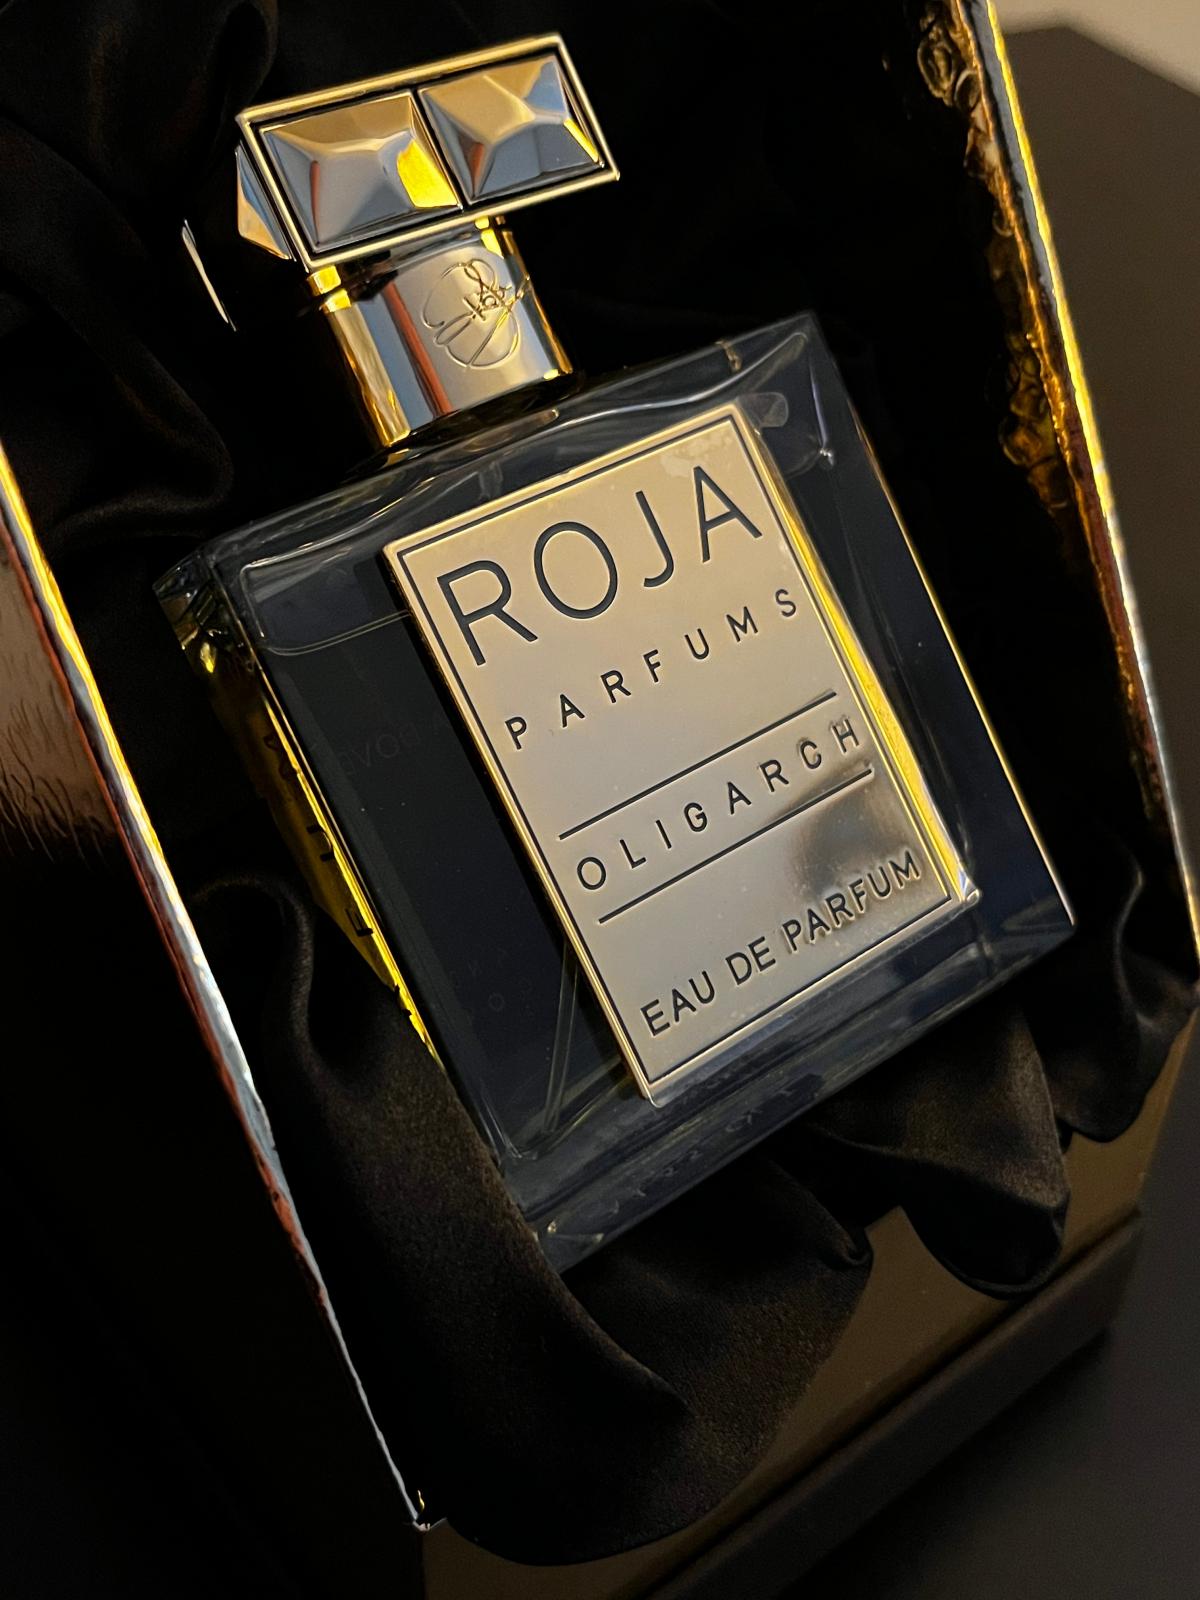 Oligarch Roja Dove cologne - a fragrance for men 2016